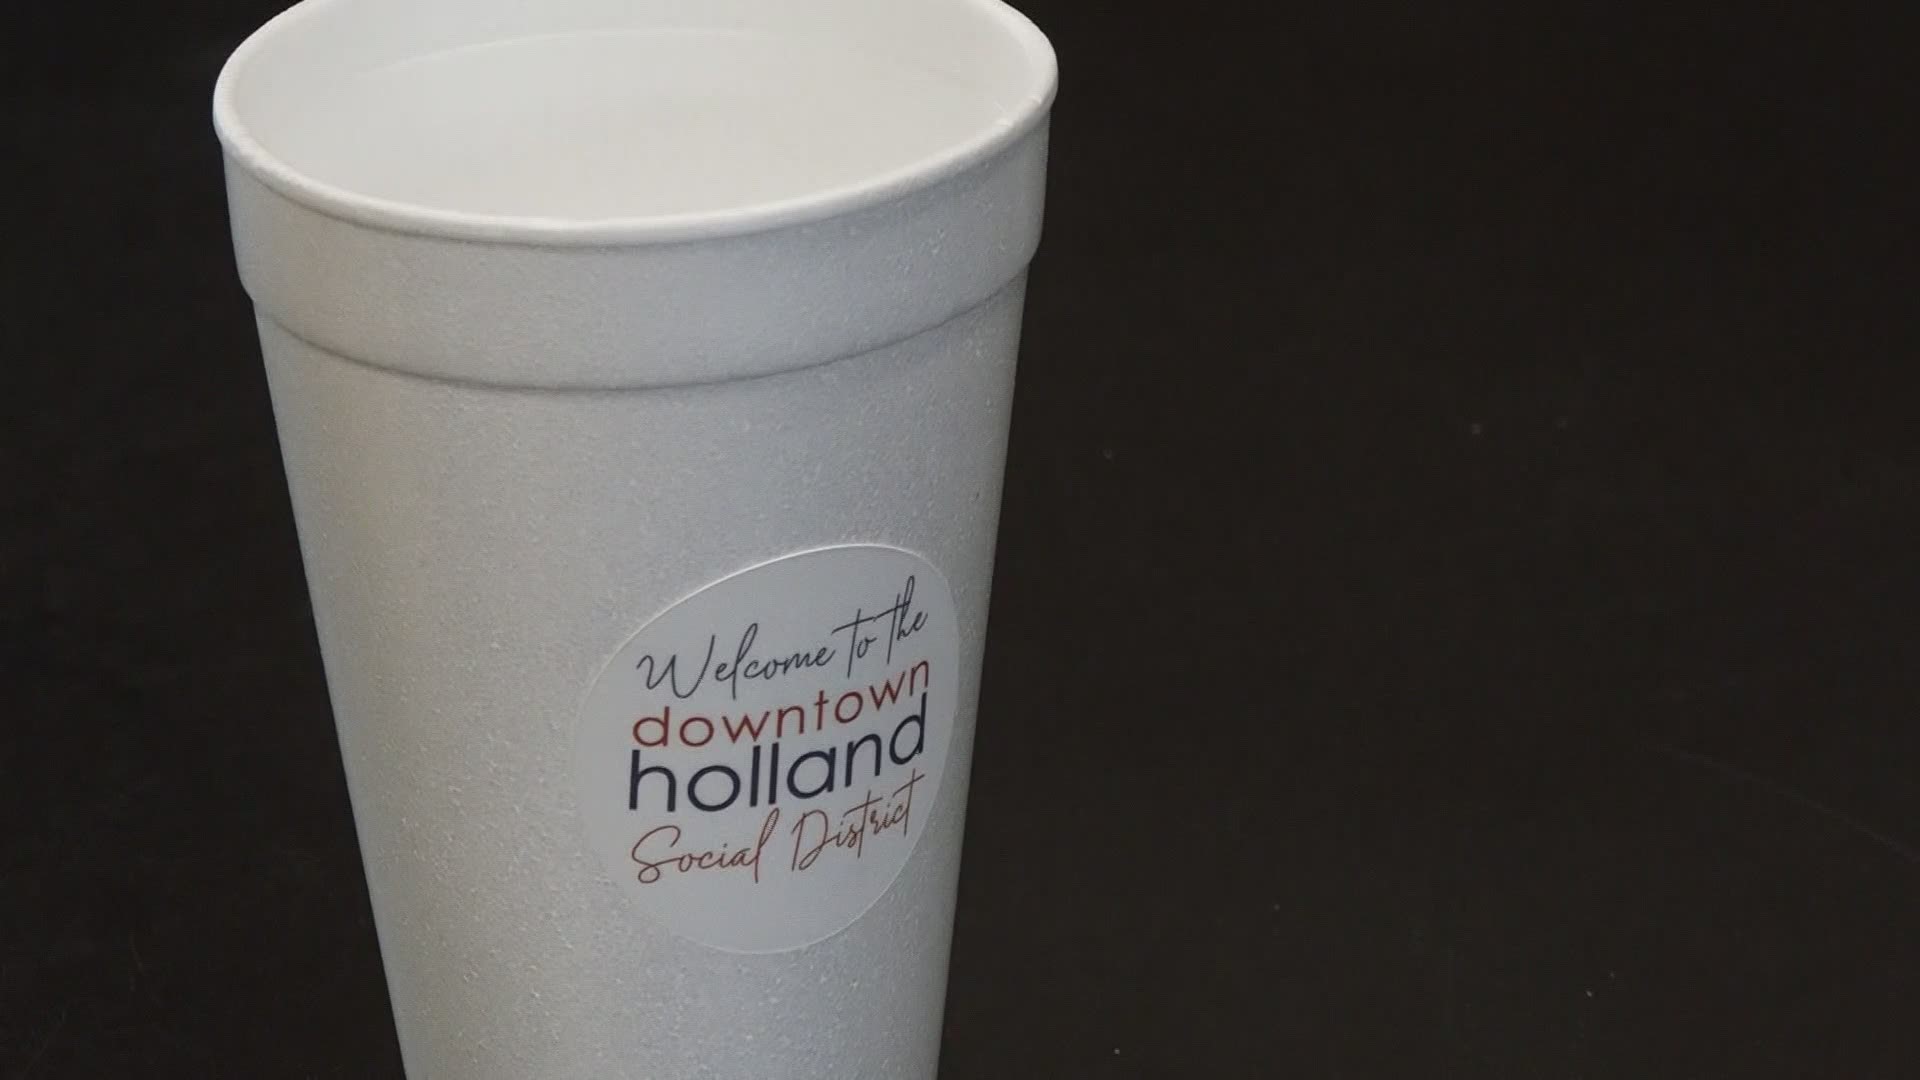 New social zones in Holland are hoping to boost revenue and keep business in downtown.